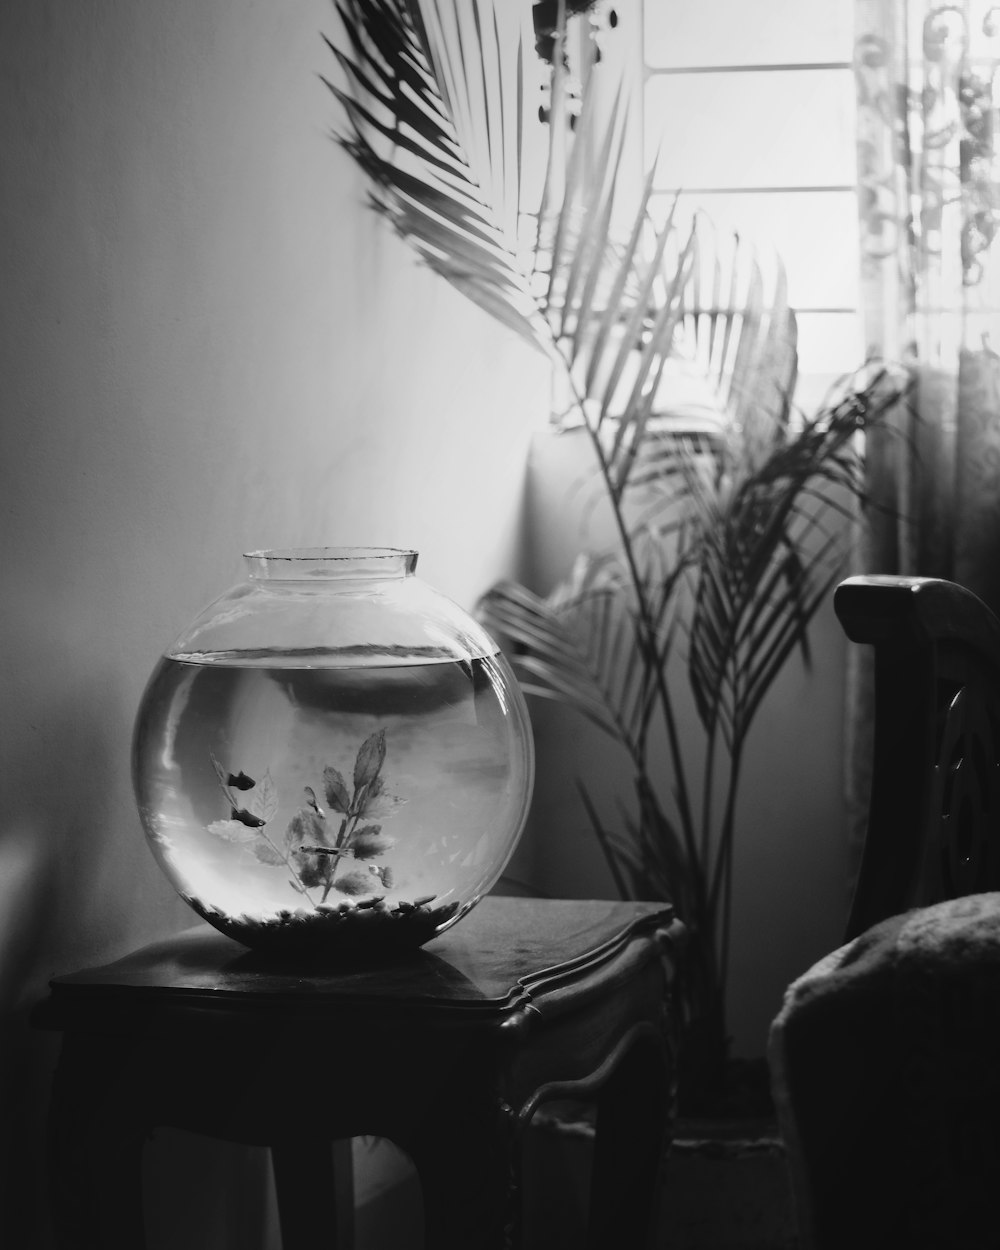 grayscale photo of glass fish bowl